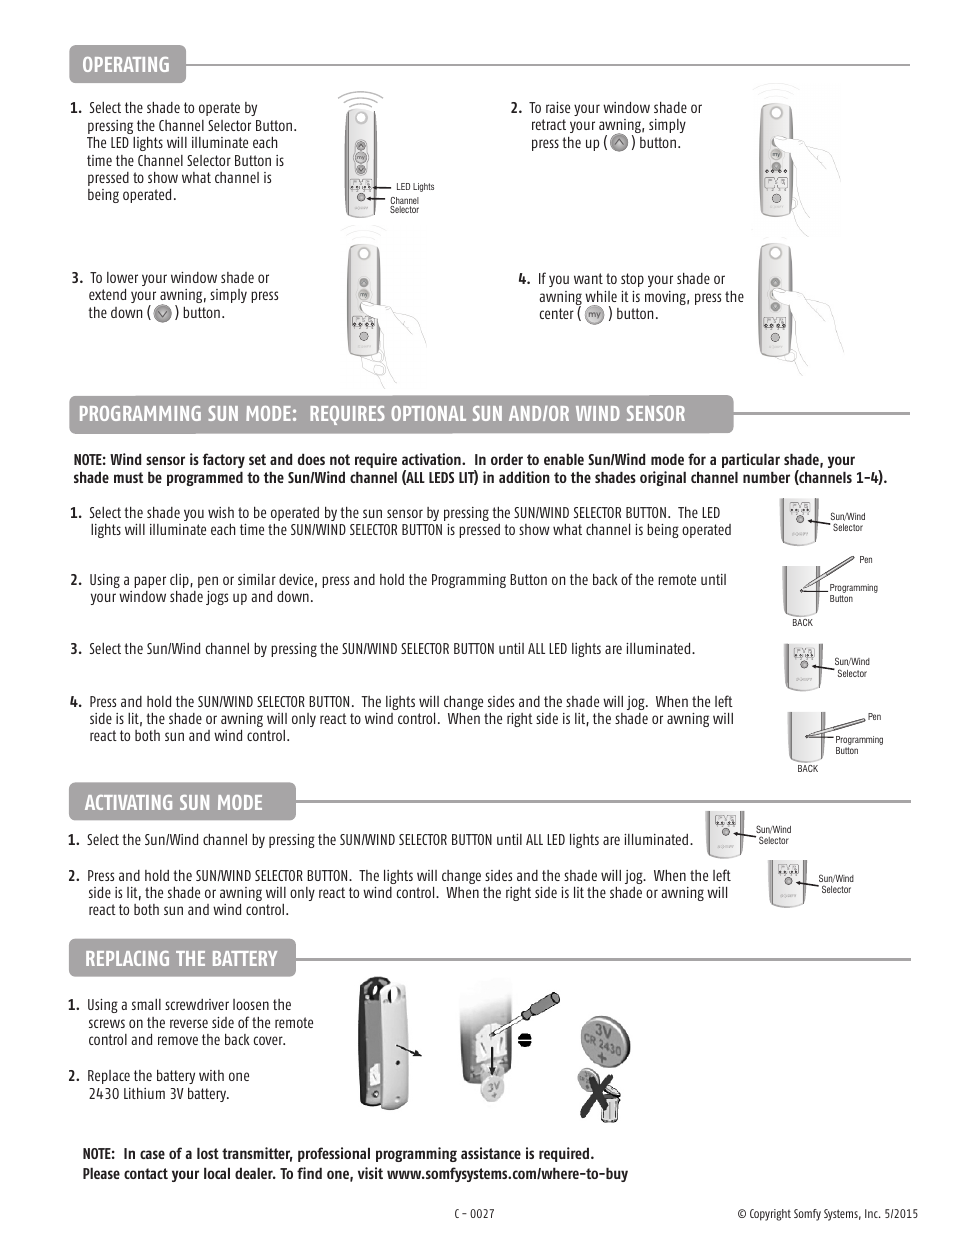 Replacing the battery, Operating, Activating sun mode | SOMFY TELIS SOLIRIS  RTS User Manual | Page 4 / 4 | Original mode